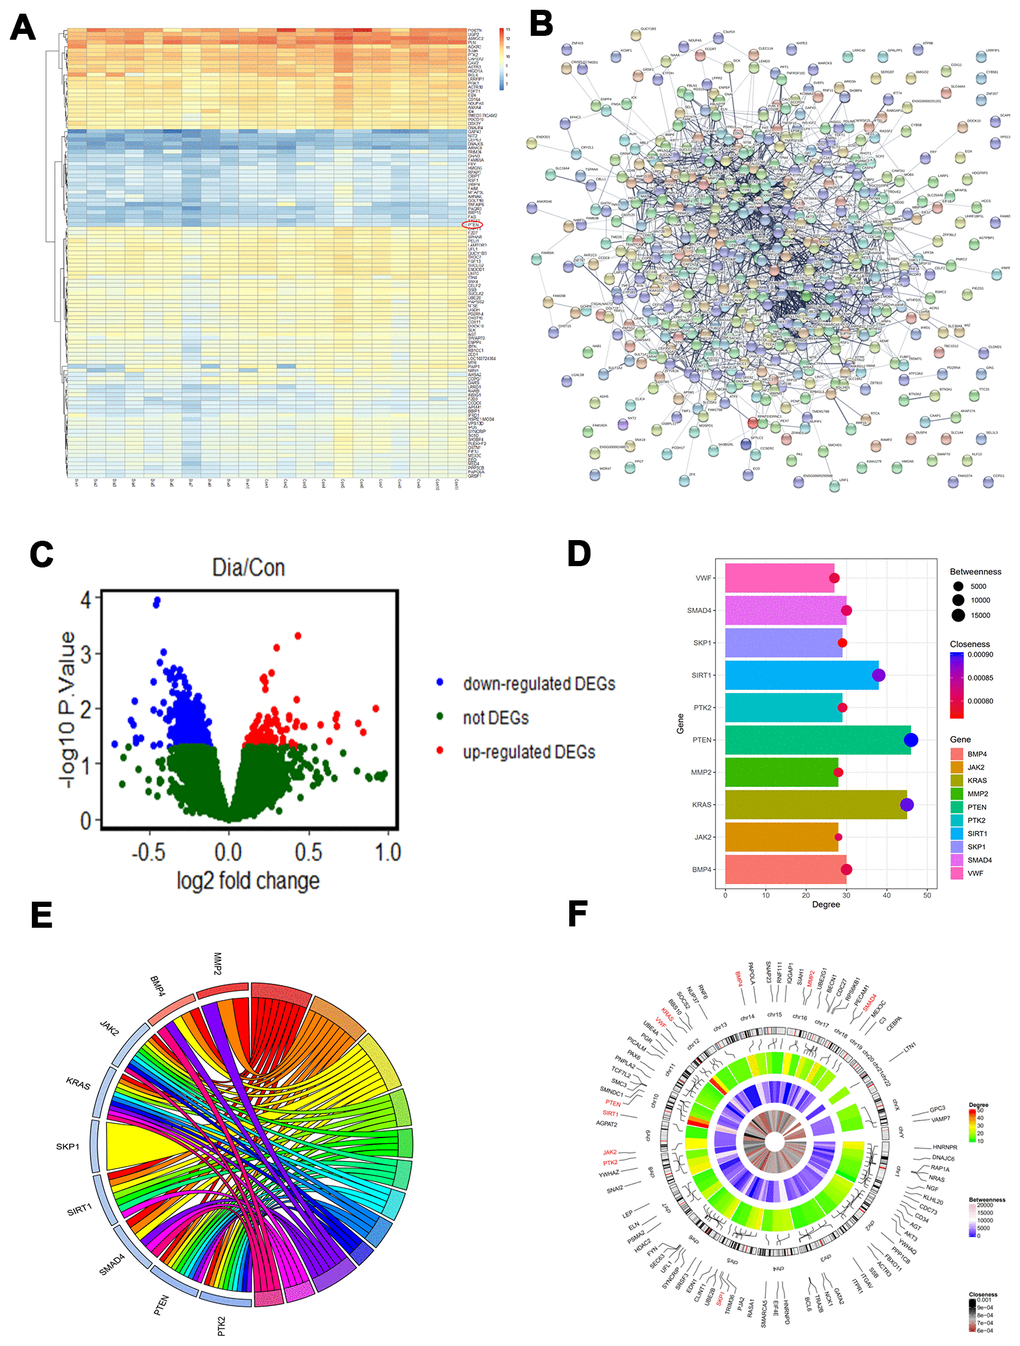 PTEN is decreased in diabetic patients. (A–C) Differentially expressed genes (DEGs) were identified between the diabetic patients and the controls. (D) The degree, betweenness, and closeness of the top 10 hub genes. (E) The degree centrality information of the top 50 genes from the DEG interaction network and their positions on chromosomes. (F) The results of enrichment analysis of hub genes.